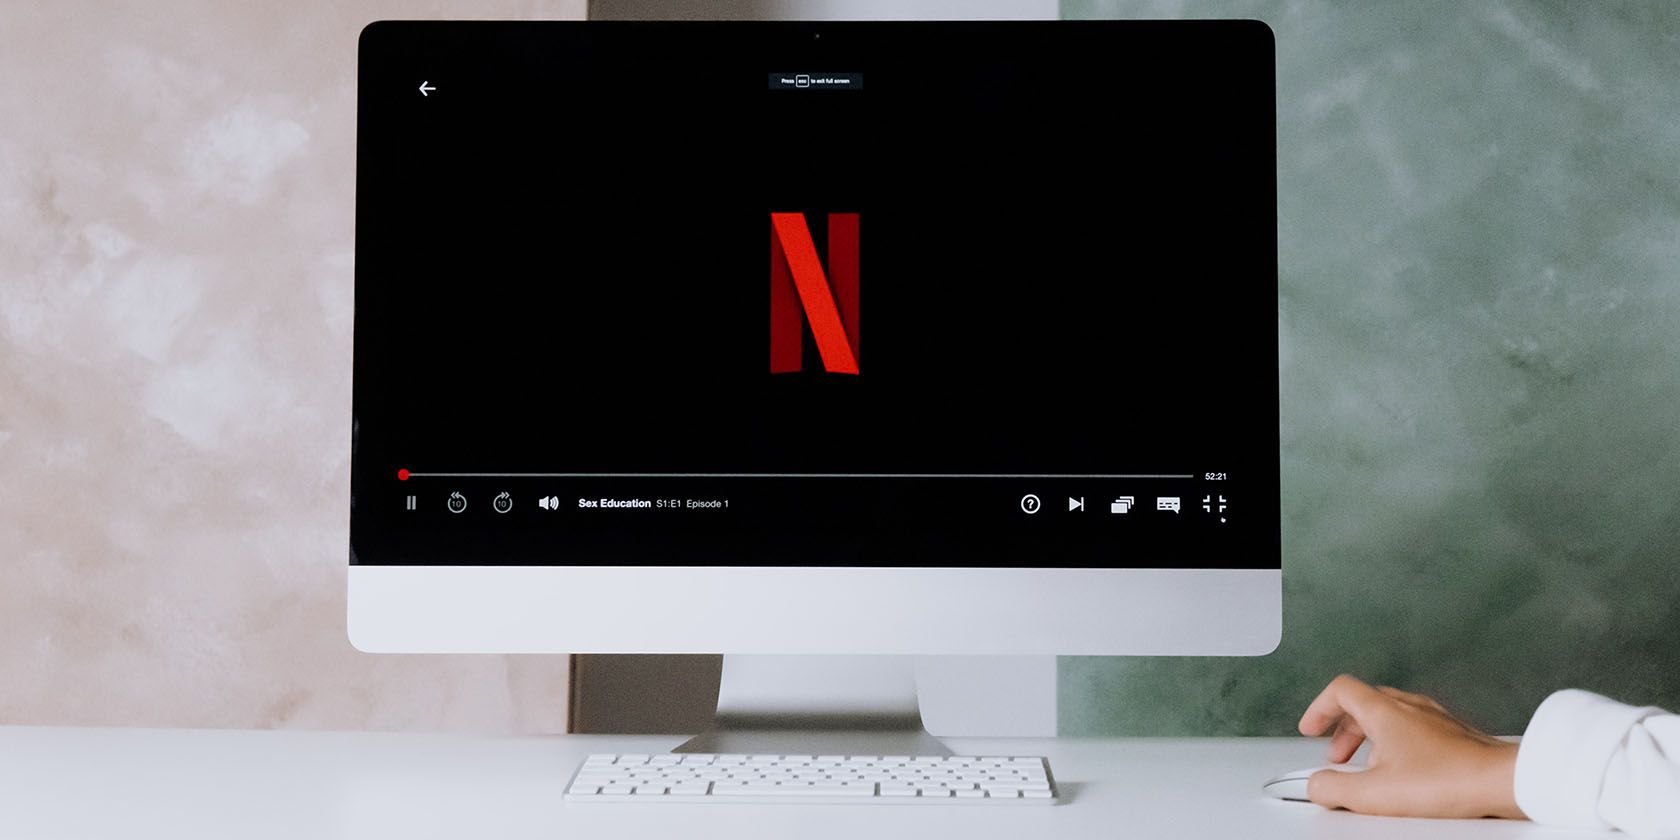 What to Do If Netflix Says "We're Having Trouble Playing This Title Right Now"